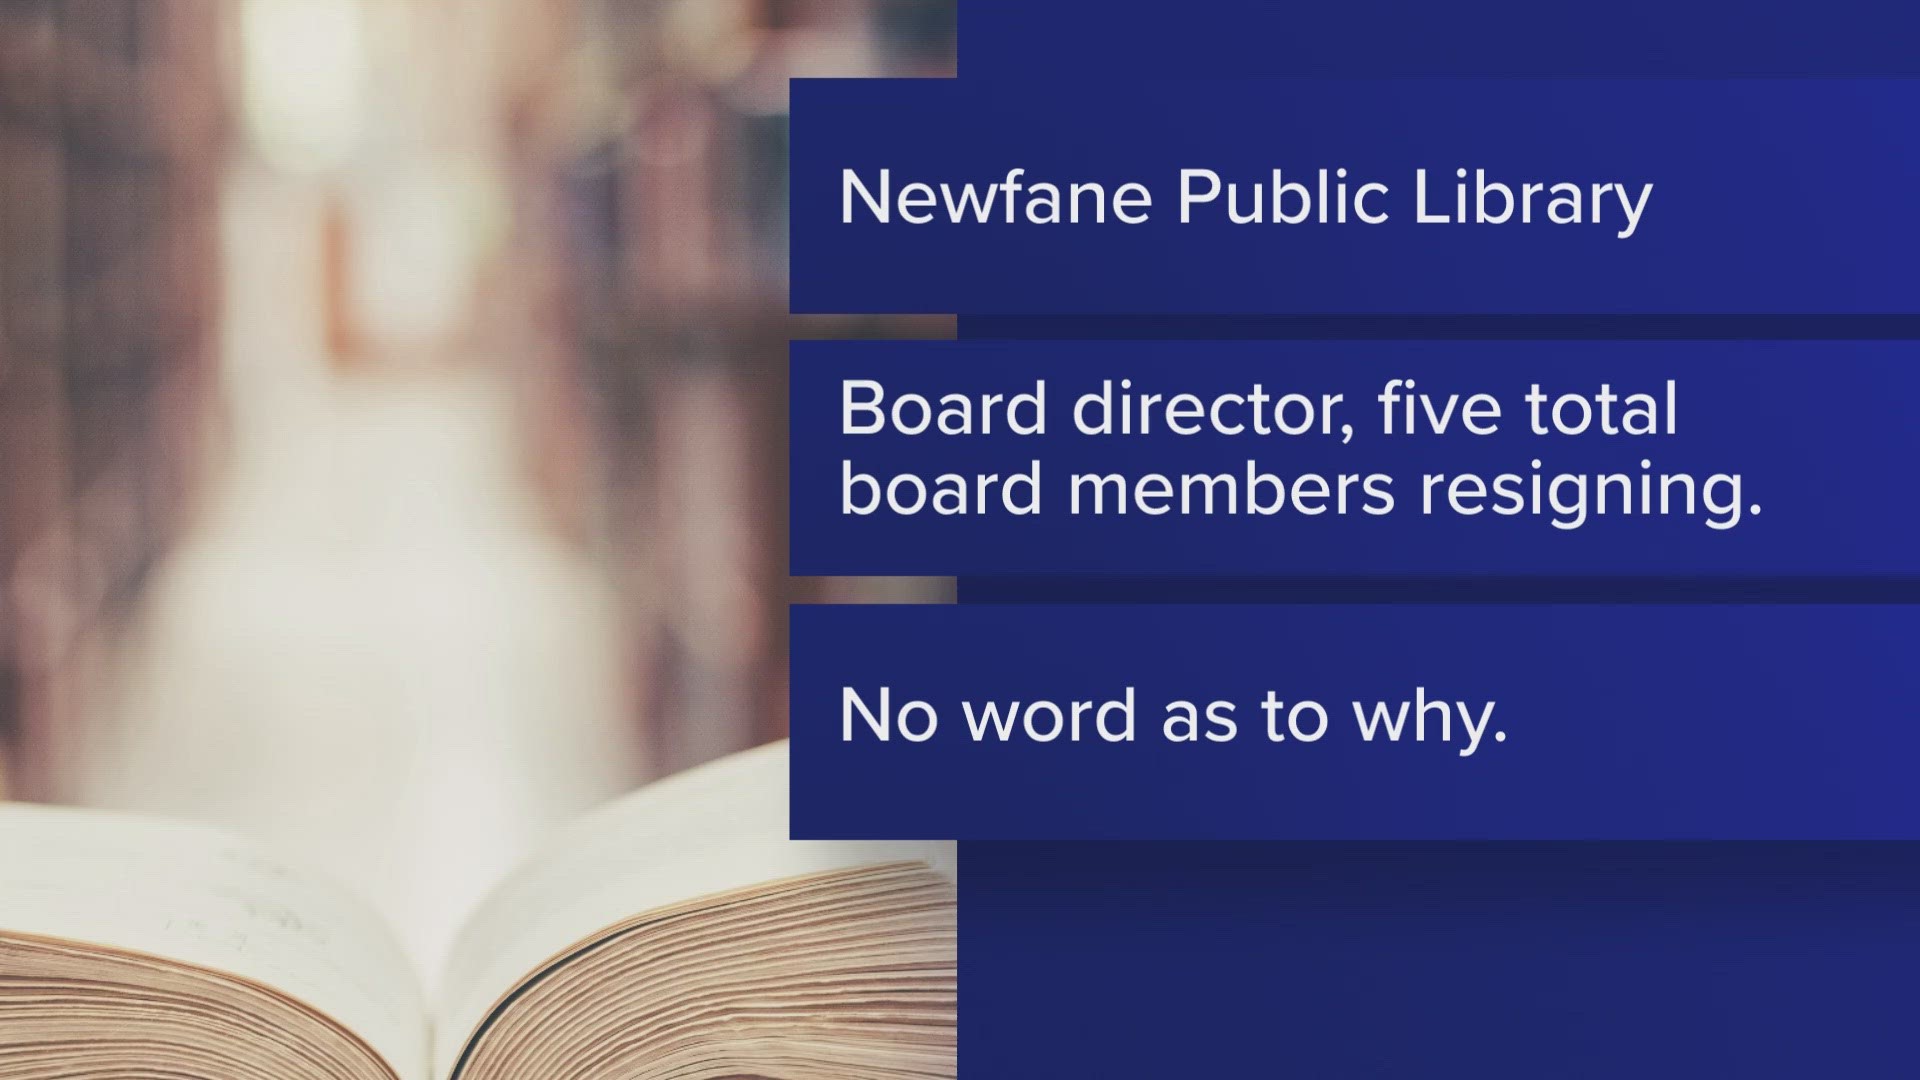 the library's director and five total members of the board are all set to resign from their positions over the next few weeks.